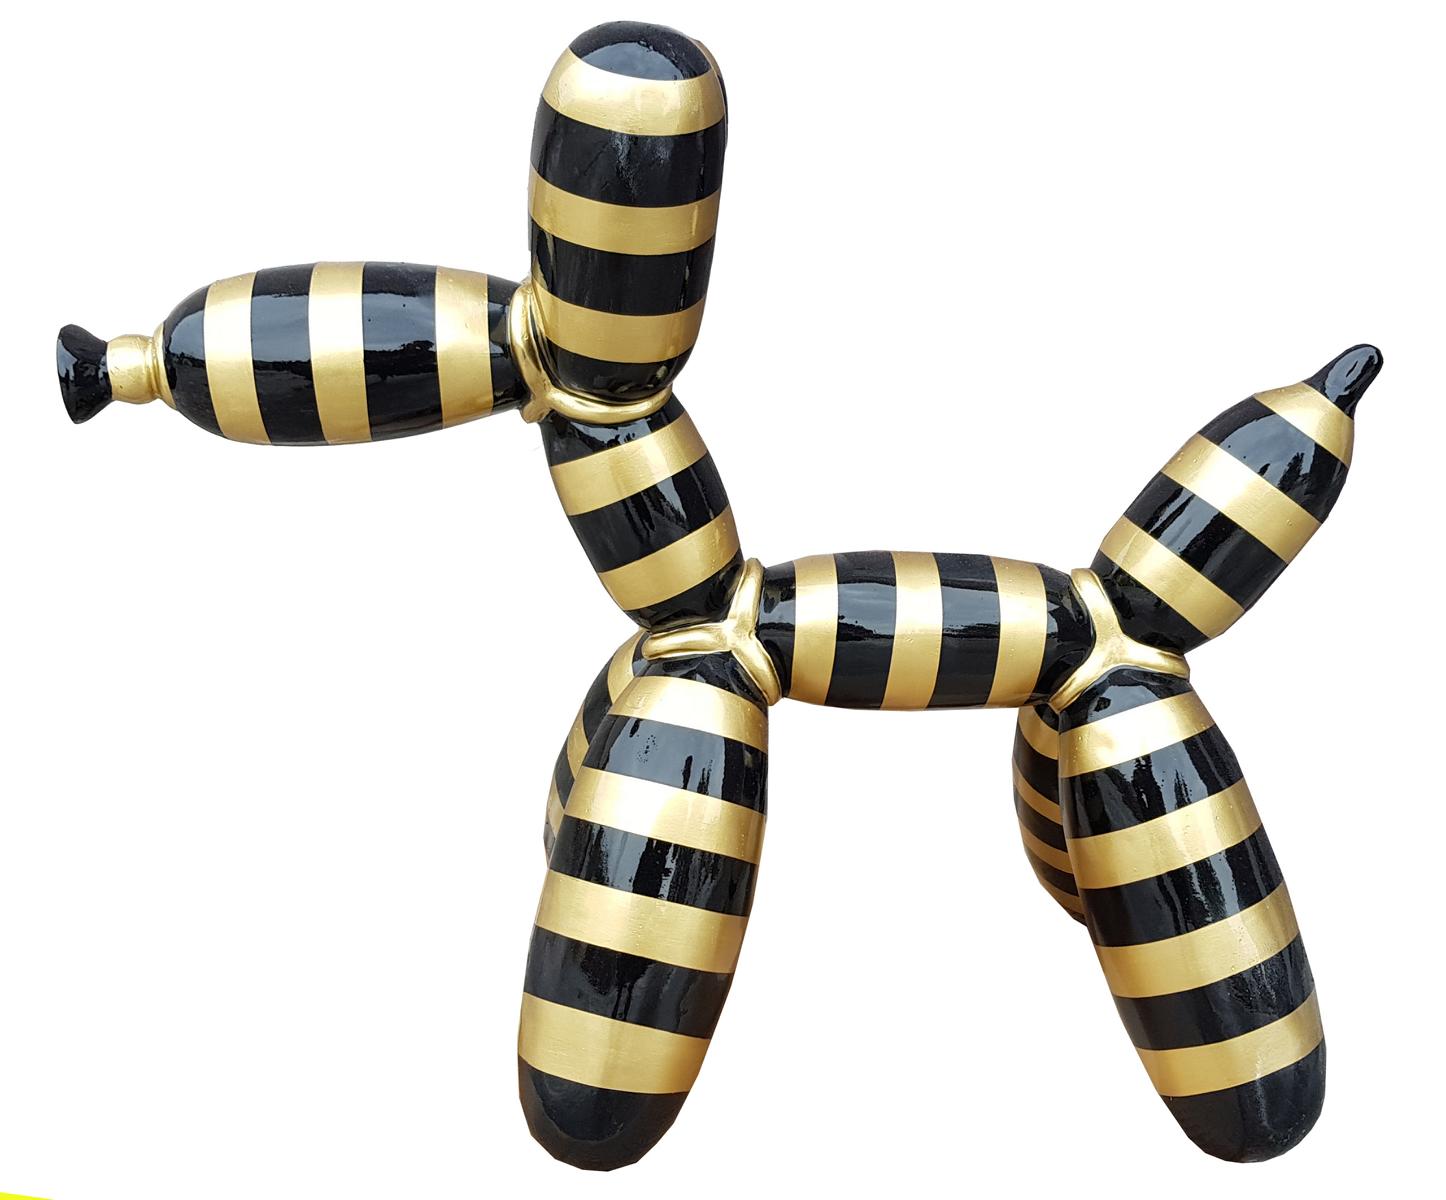 Design Figures Balloon Decoration Modern Abstract Sculpture Inflatable Dog New